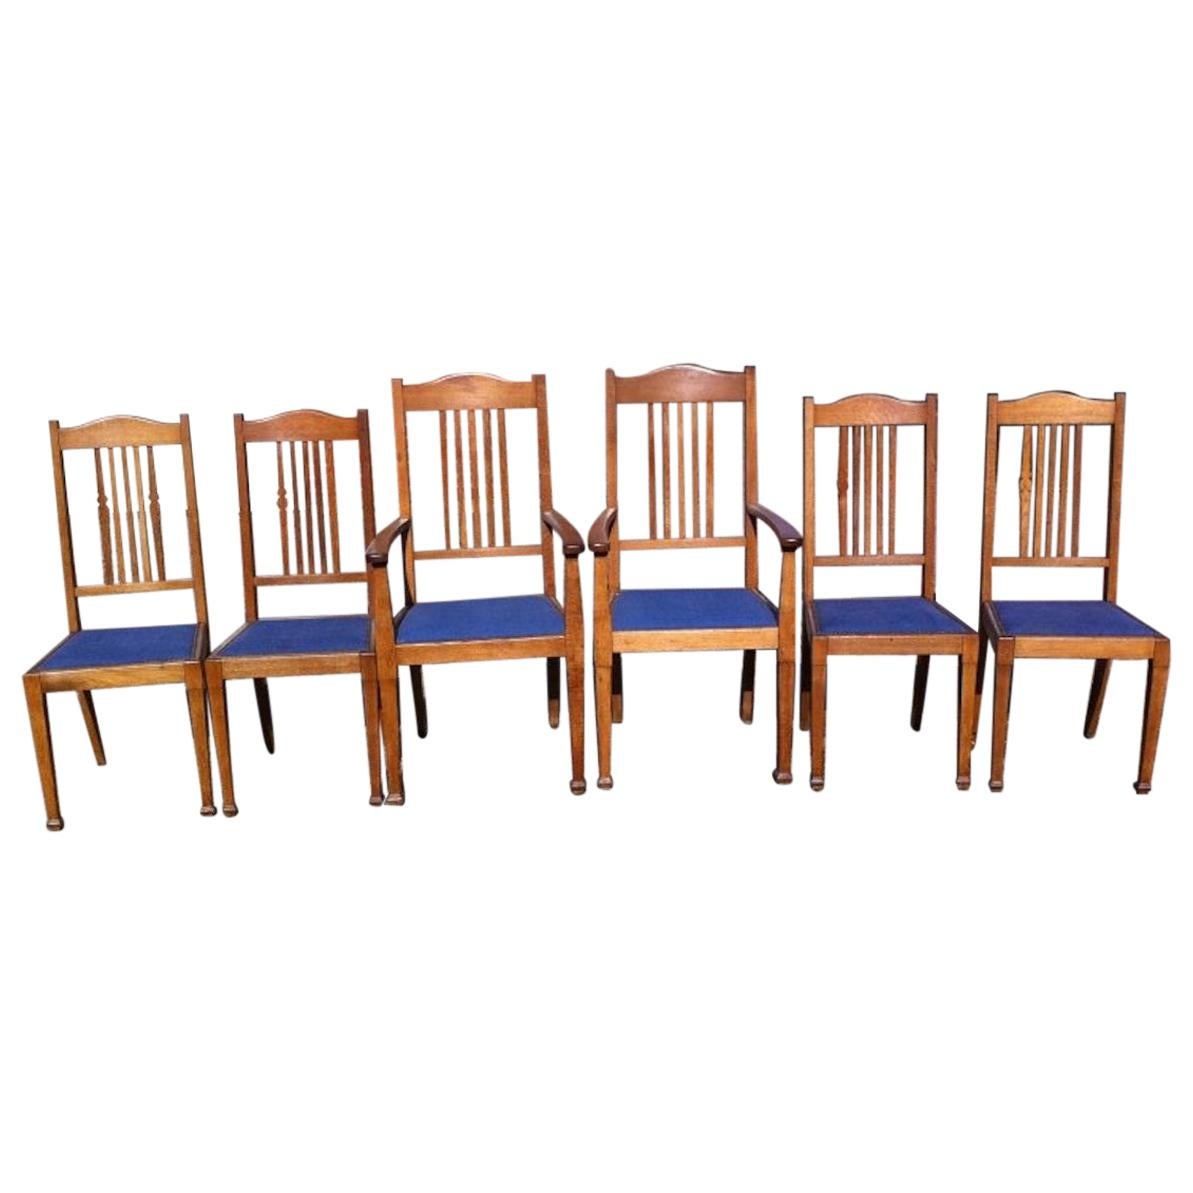 Shapland and Petter, a Good Quality Set of Six Arts and Crafts Oak Dining Chairs